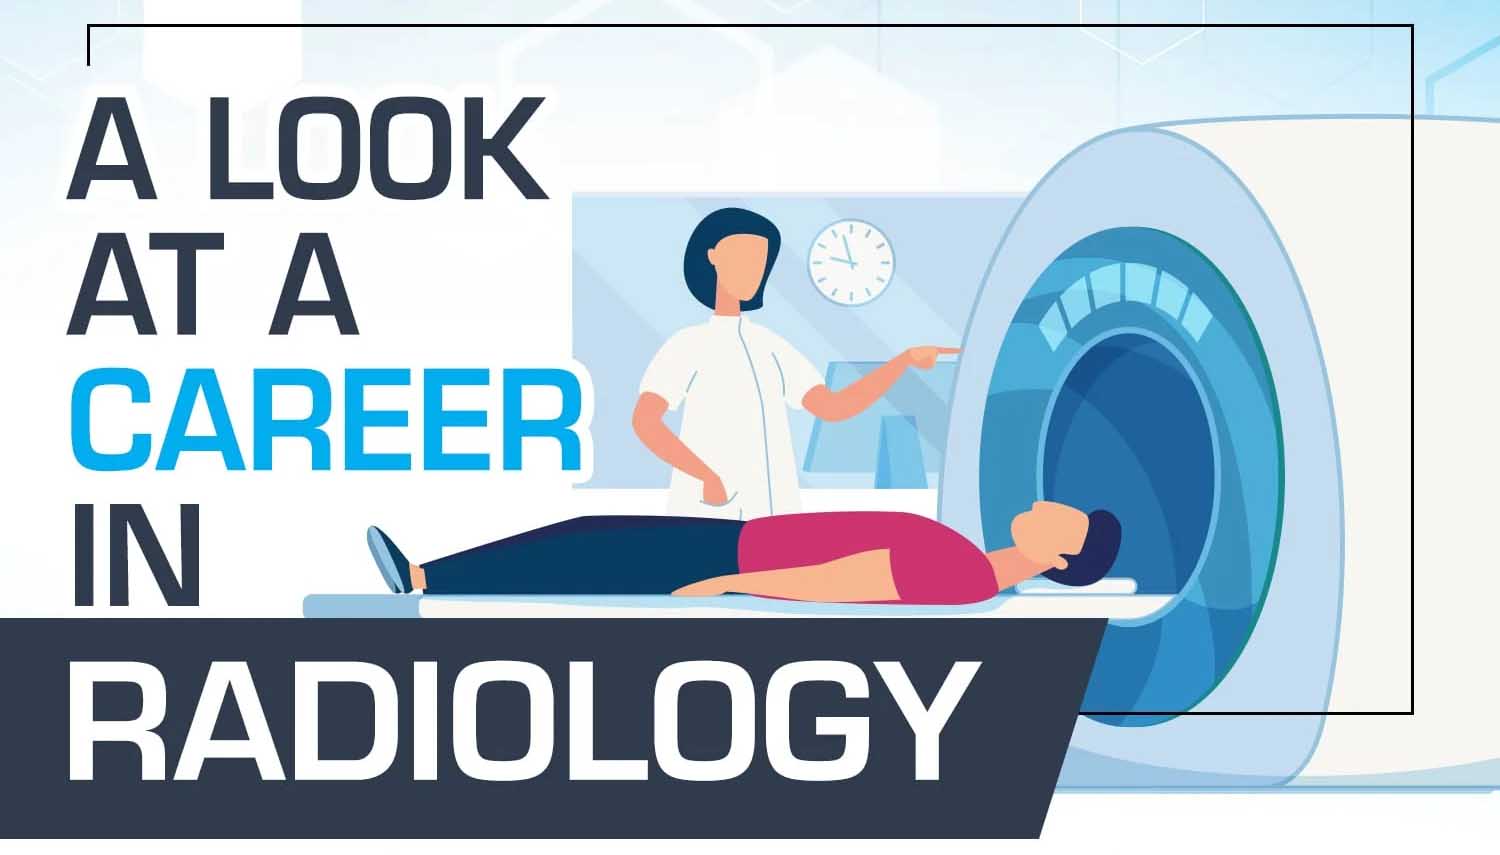 A Look at a Career in Radiology